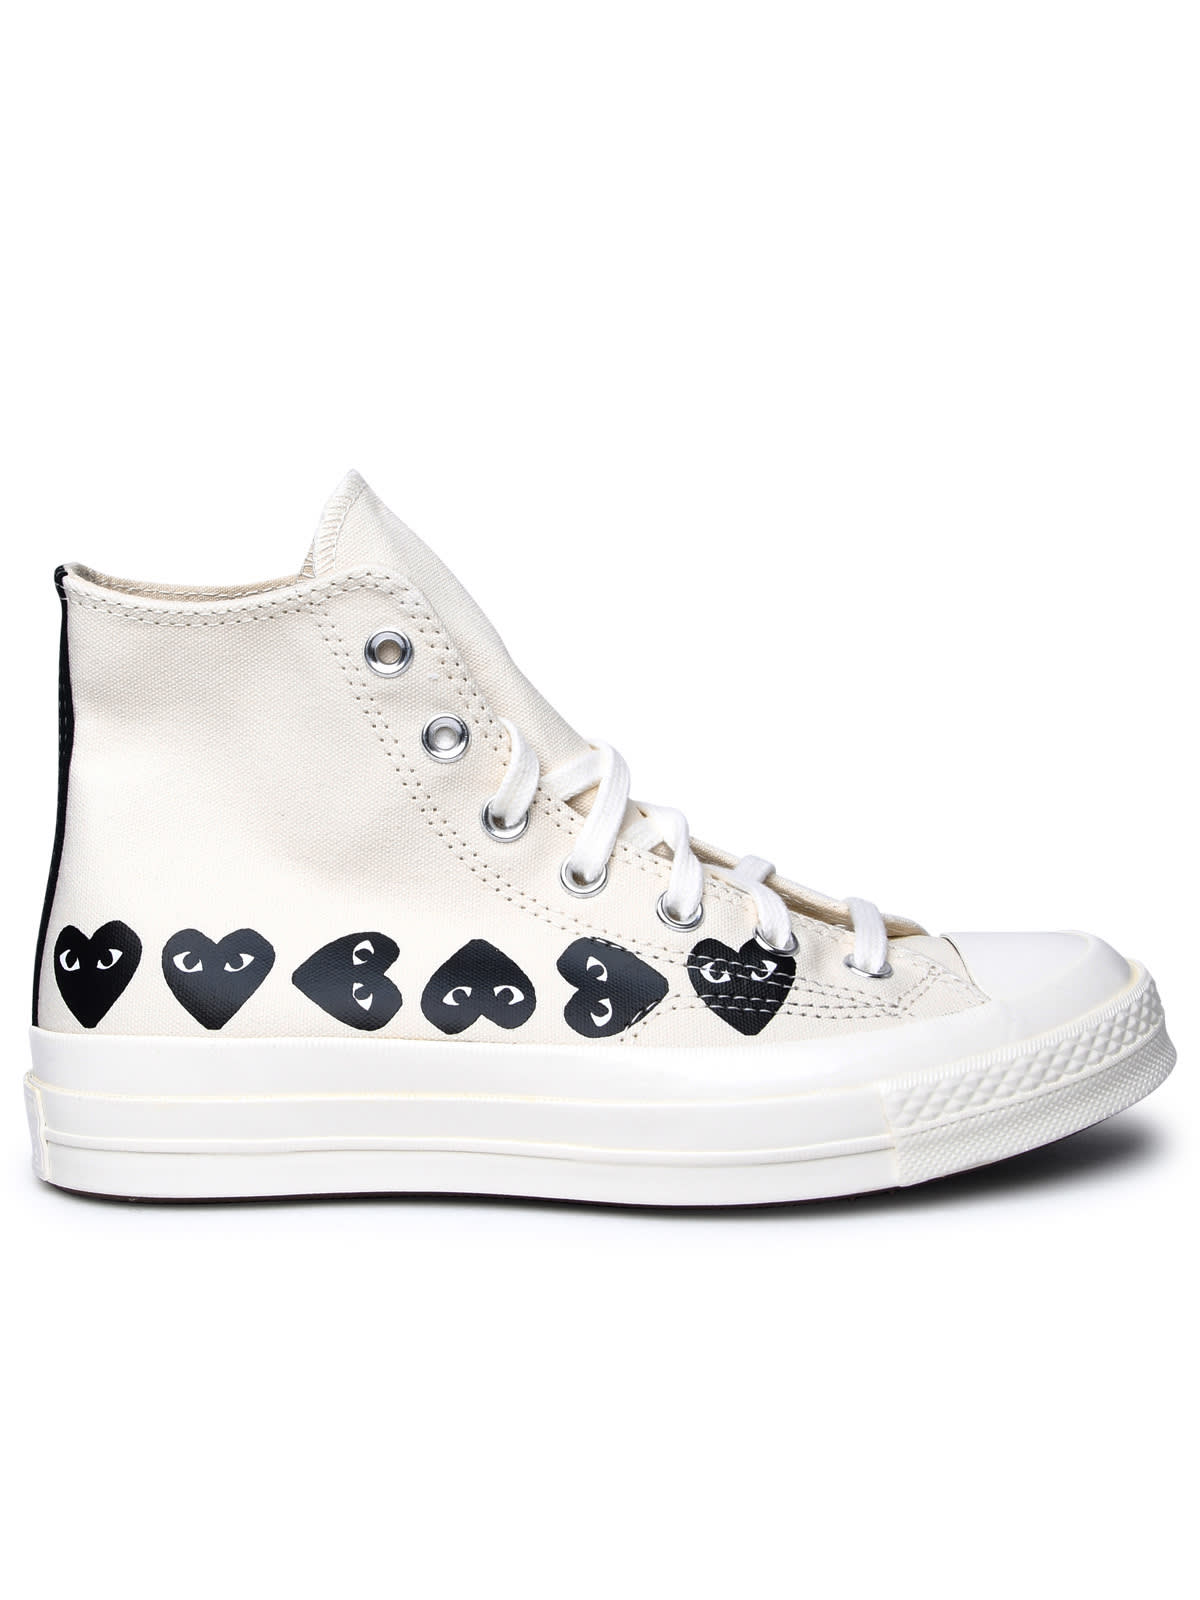 Comme des Garçons Play Ivory Fabric Sneakers